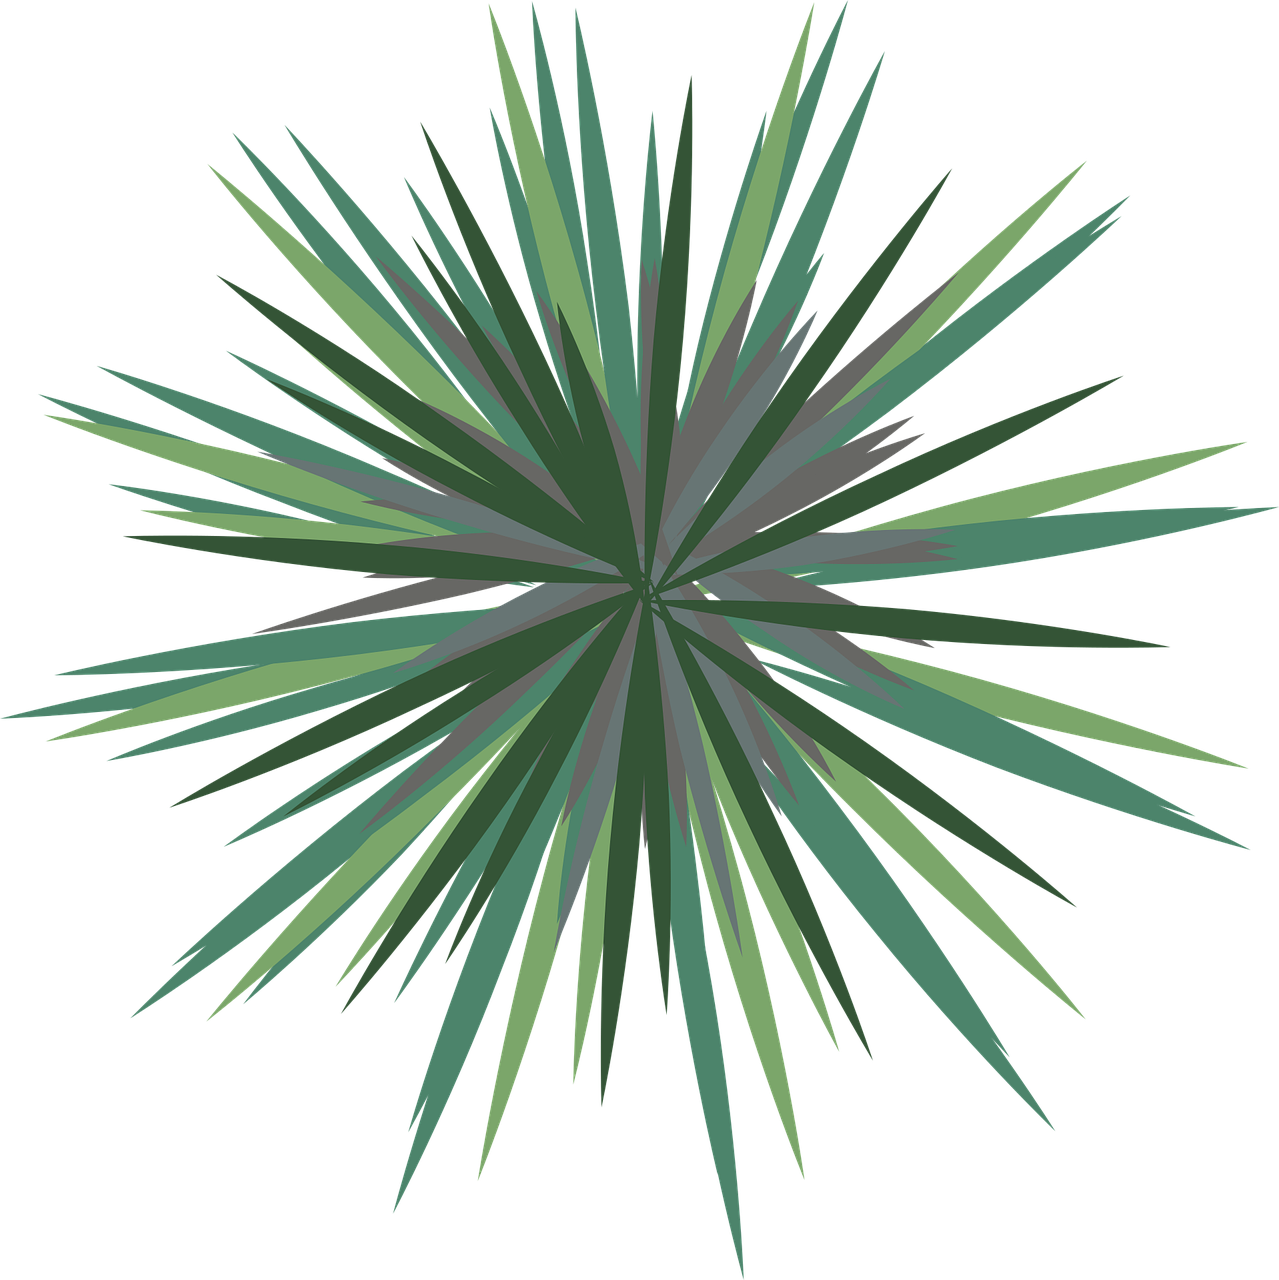 a green starburst on a black background, a digital rendering, inspired by Hasegawa Tōhaku, colorful tropical plants, simple stylized, viewed from above, celebration